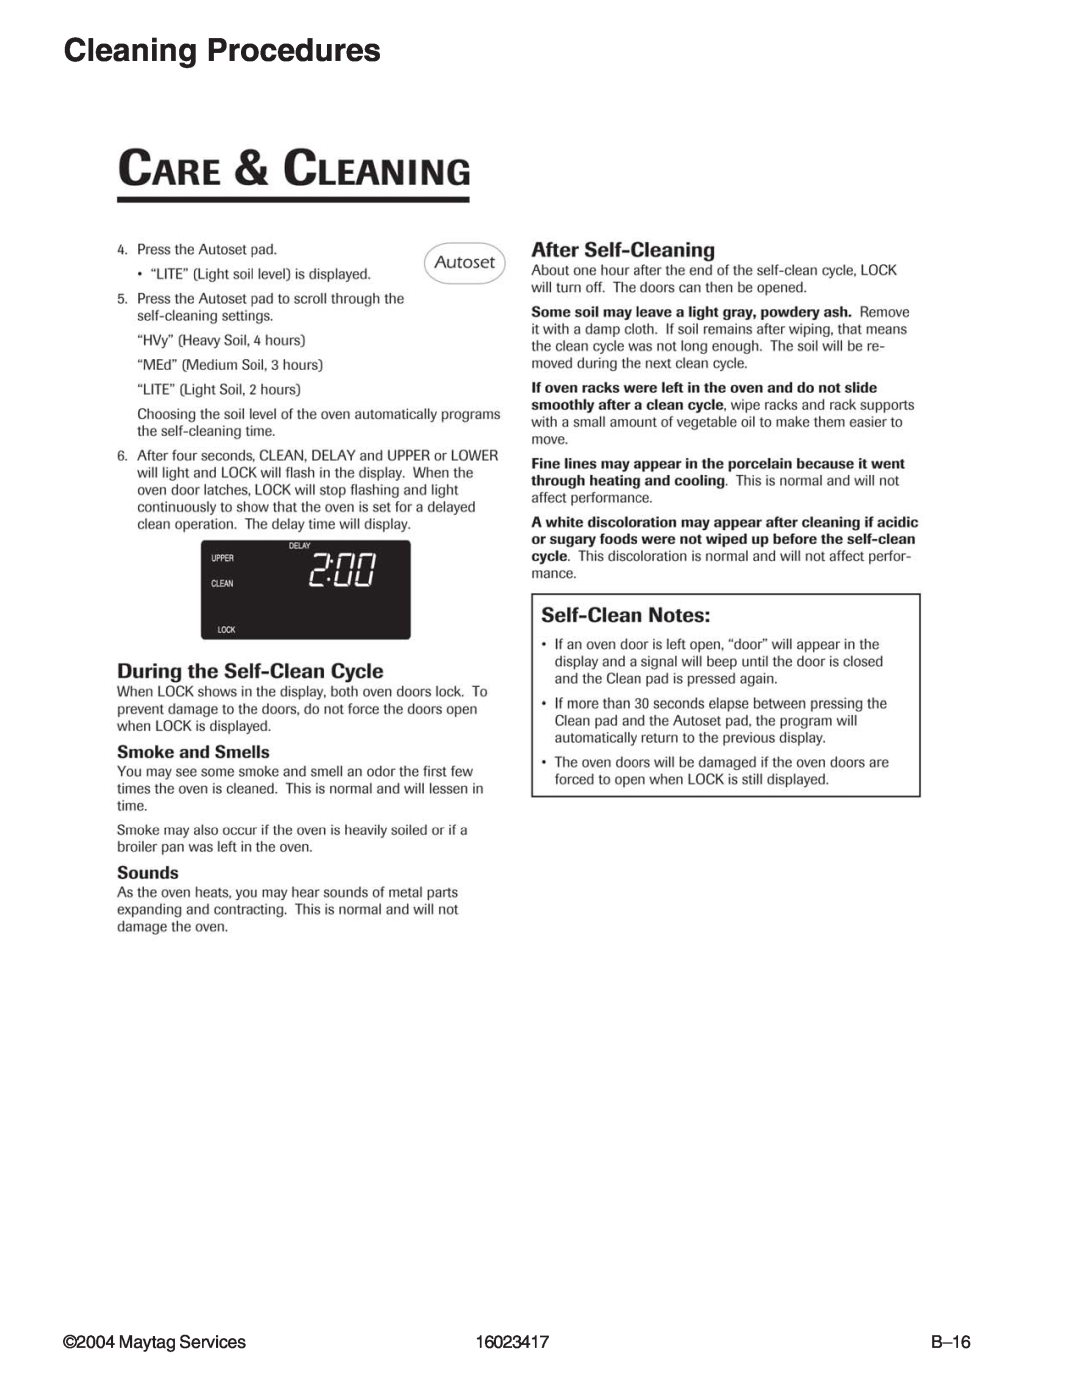 Jenn-Air JDR8895AAB/S/W, JDR8895ACS/W manual Cleaning Procedures, Maytag Services, 16023417, B–16 